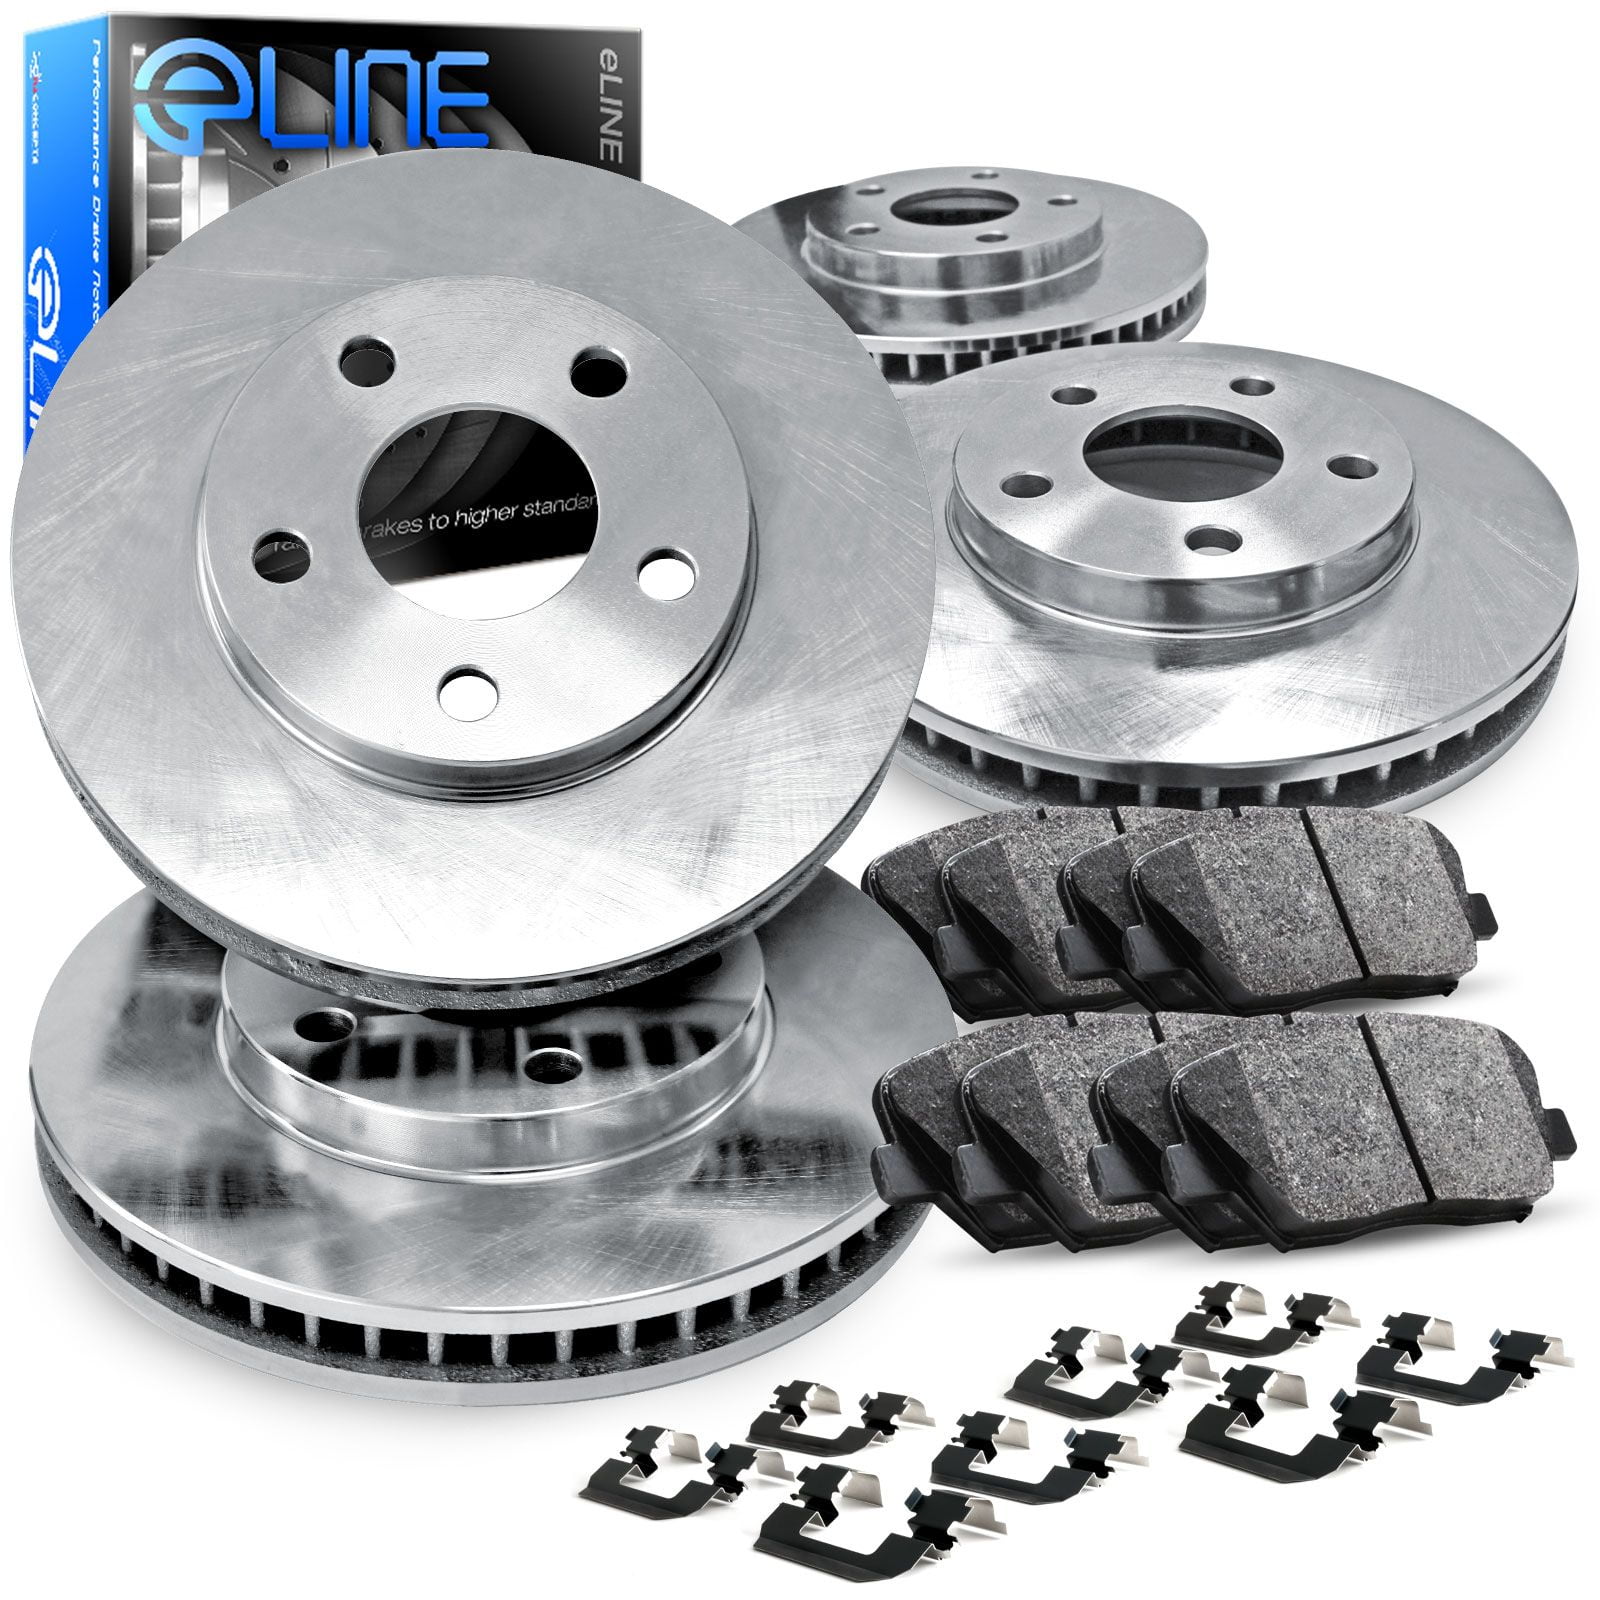 Details about   2013 2014 for Buick LaCrosse Brake Rotors and Ceramic Pads Rear 